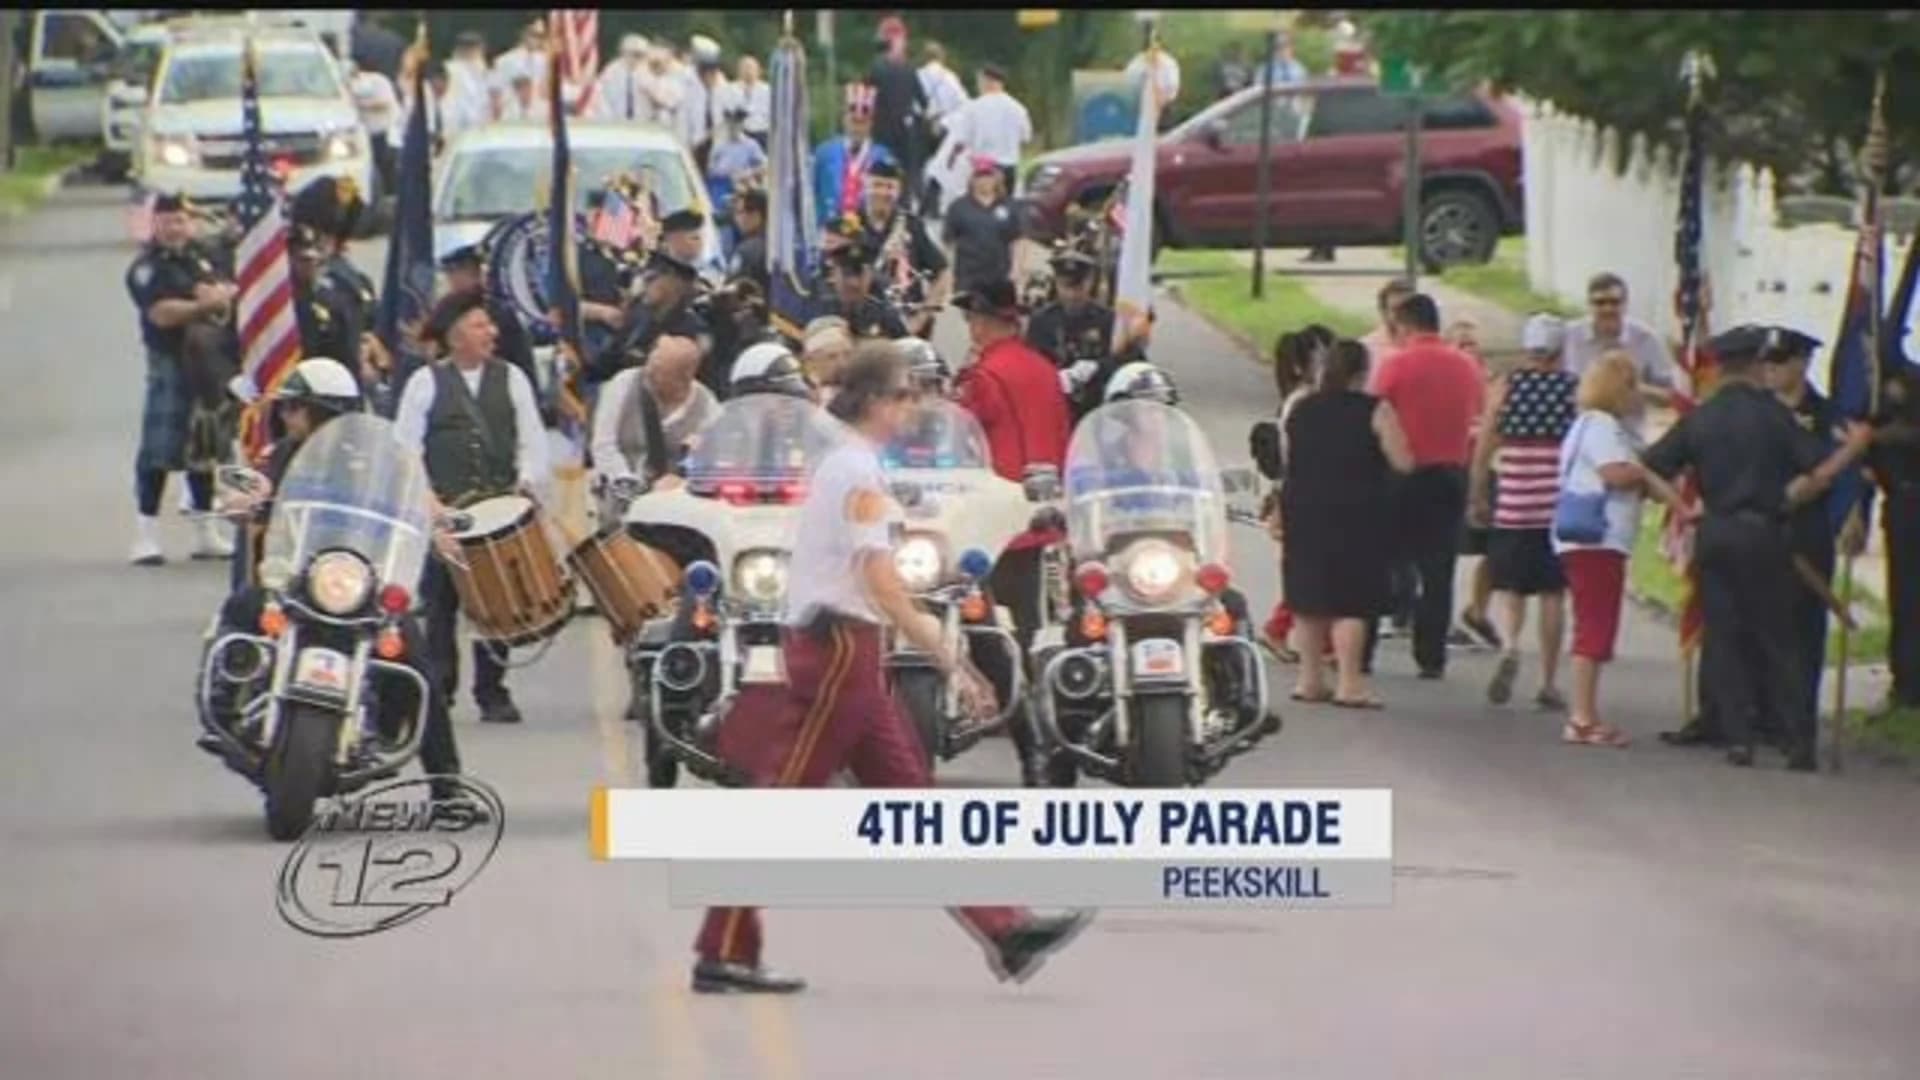 Peekskill holds traditional 4th of July parade